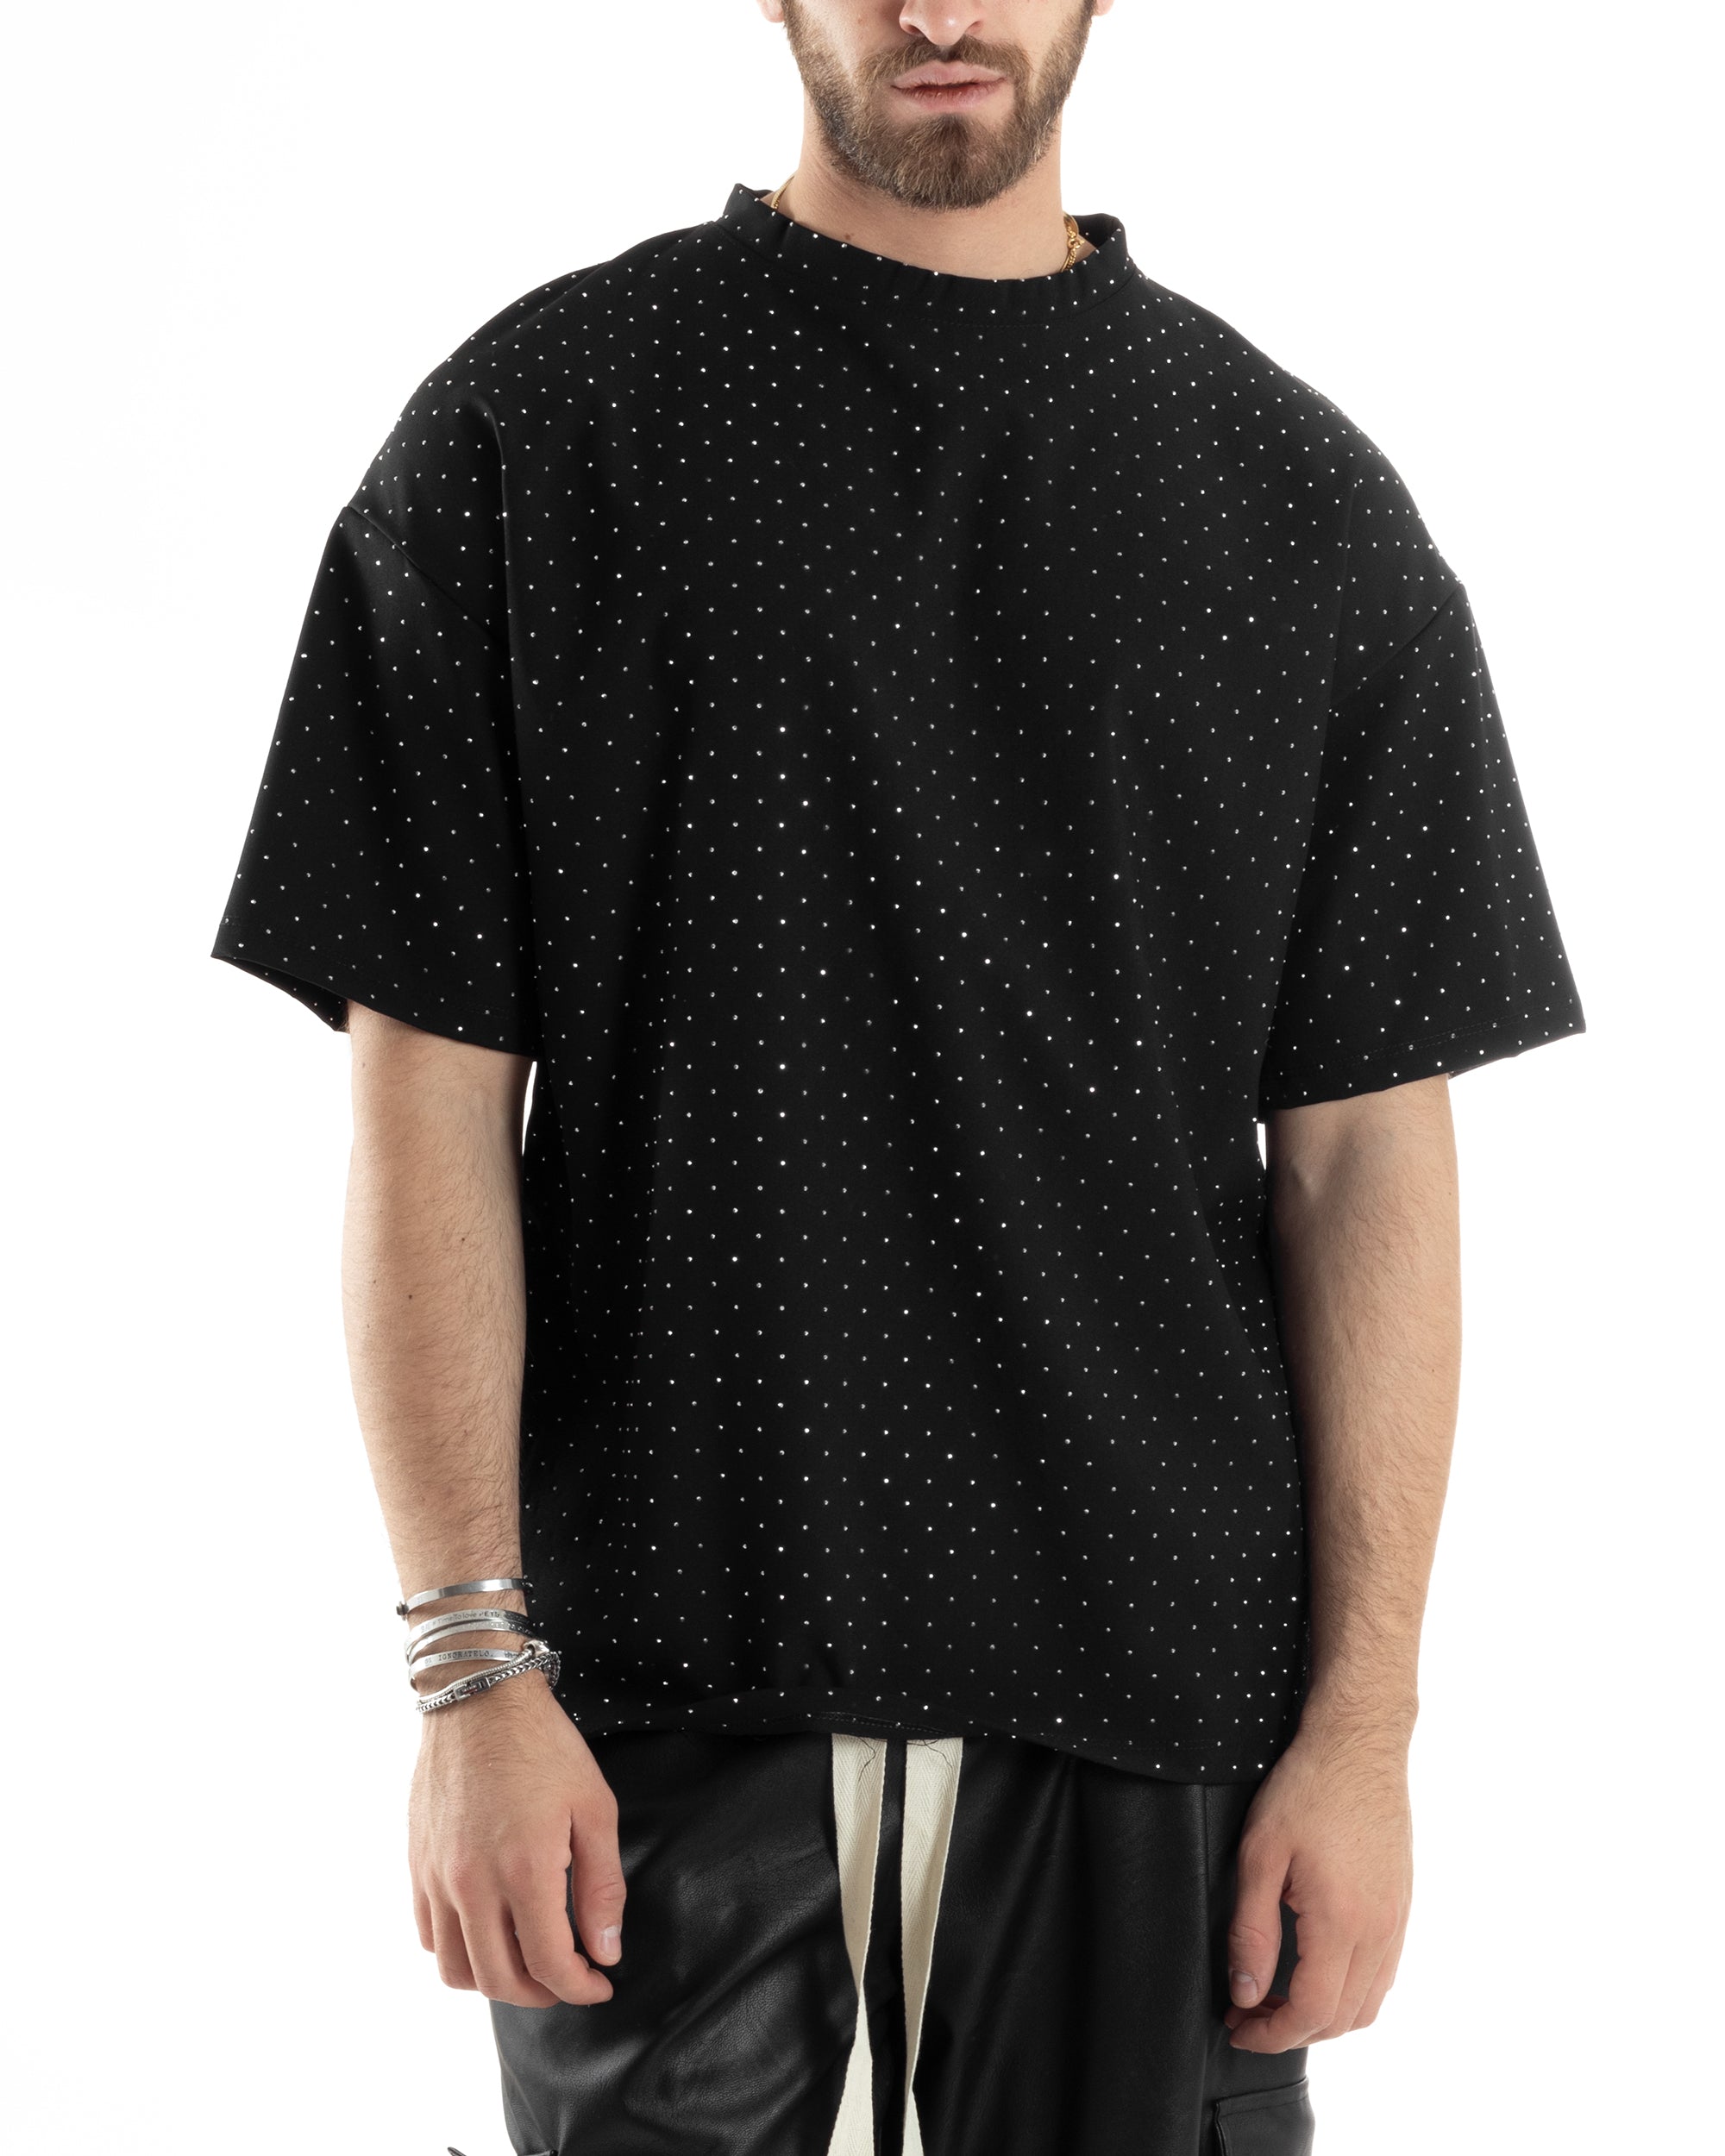 Men's Seraph Collar T-shirt Solid Color Buttons Short Sleeve Black Cotton Casual GIOSAL-TS2960A